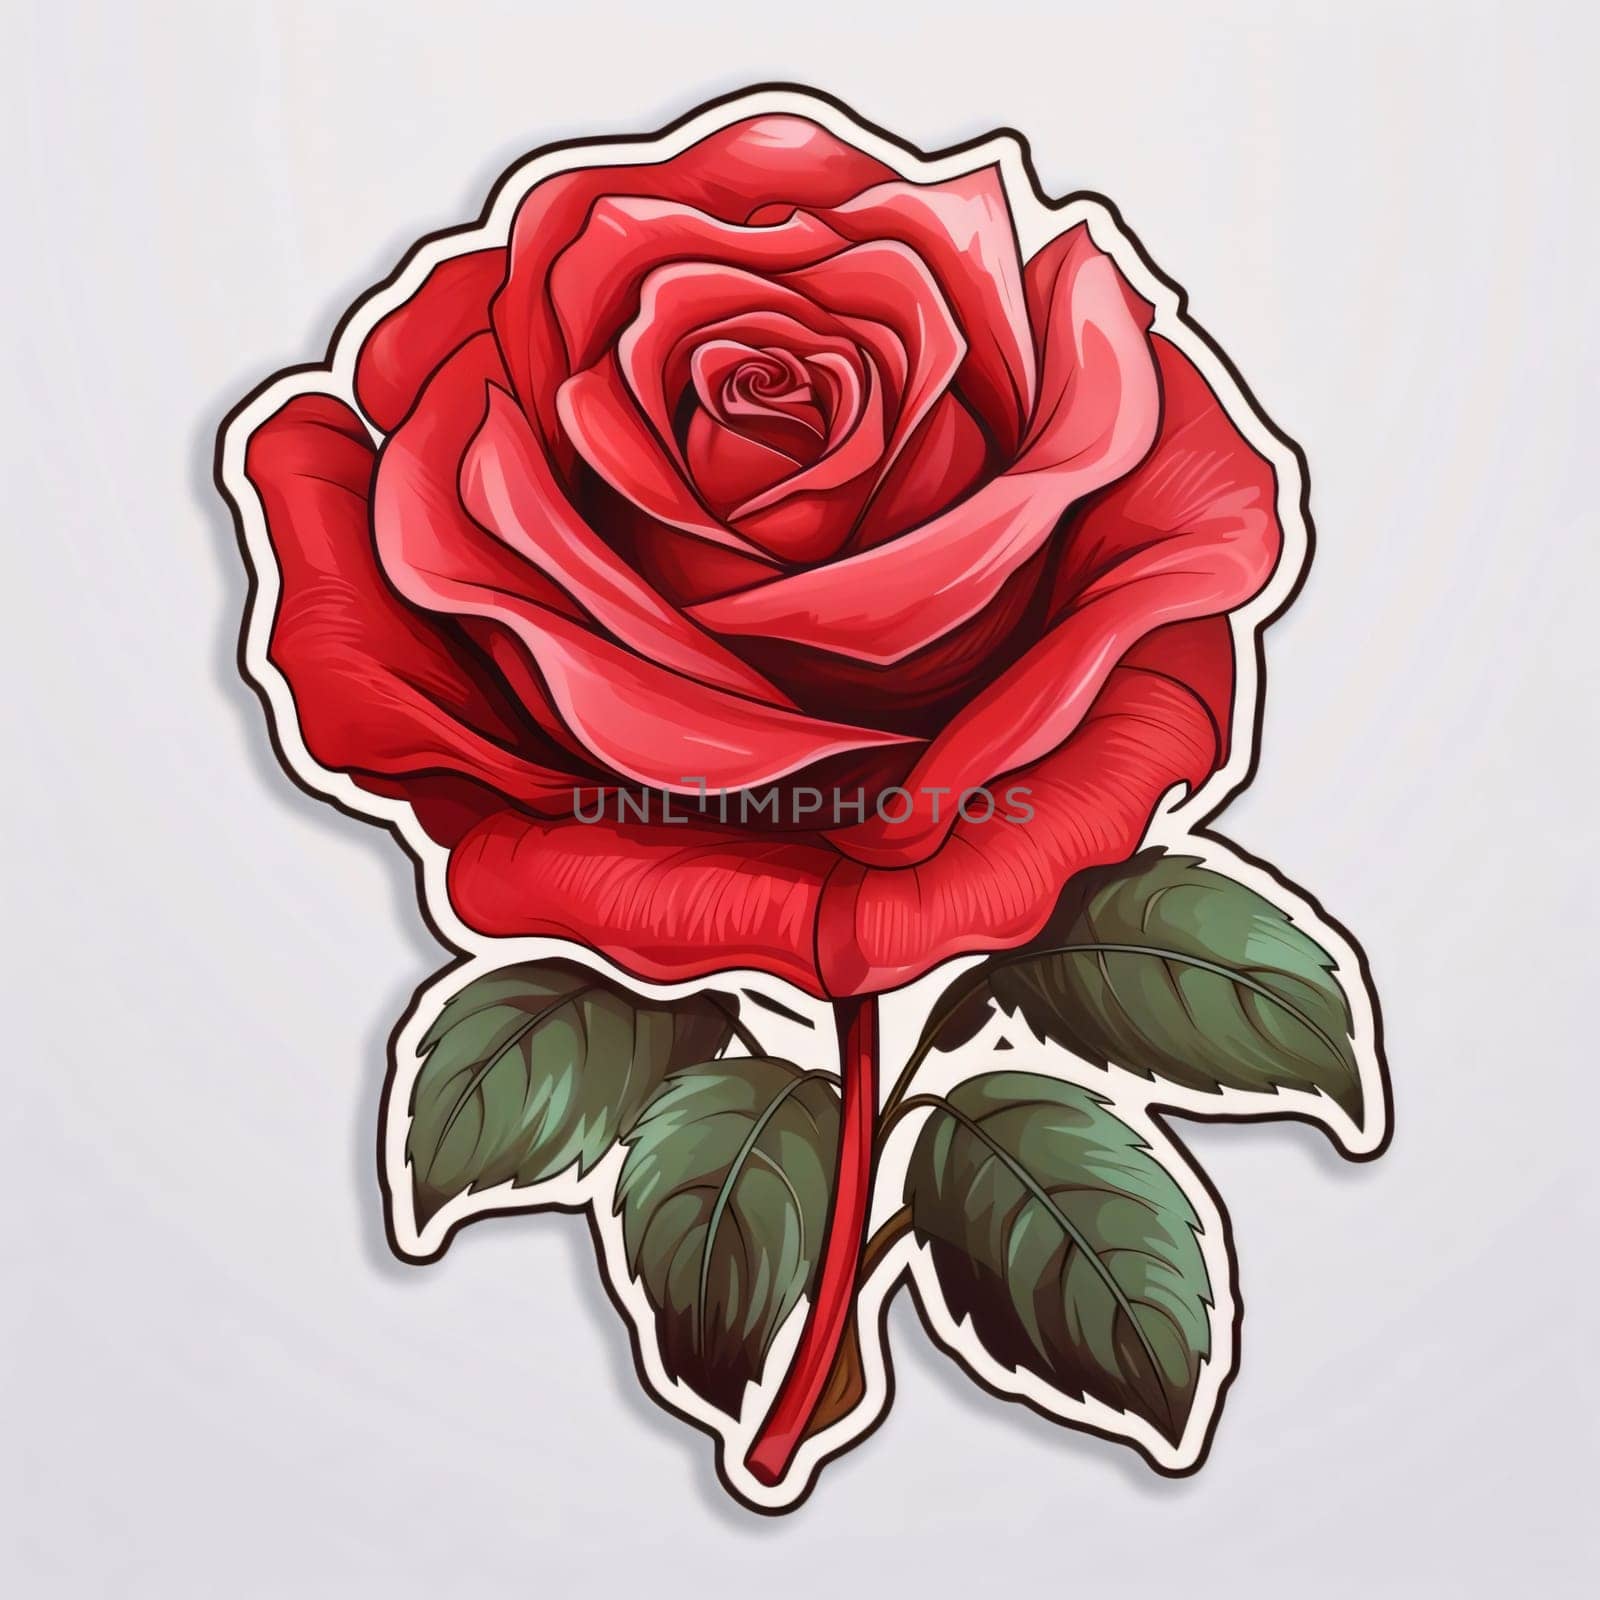 Sticker Red Rose with Green Leaves. Flowering flowers, a symbol of spring, new life. A joyful time of nature waking up to life.